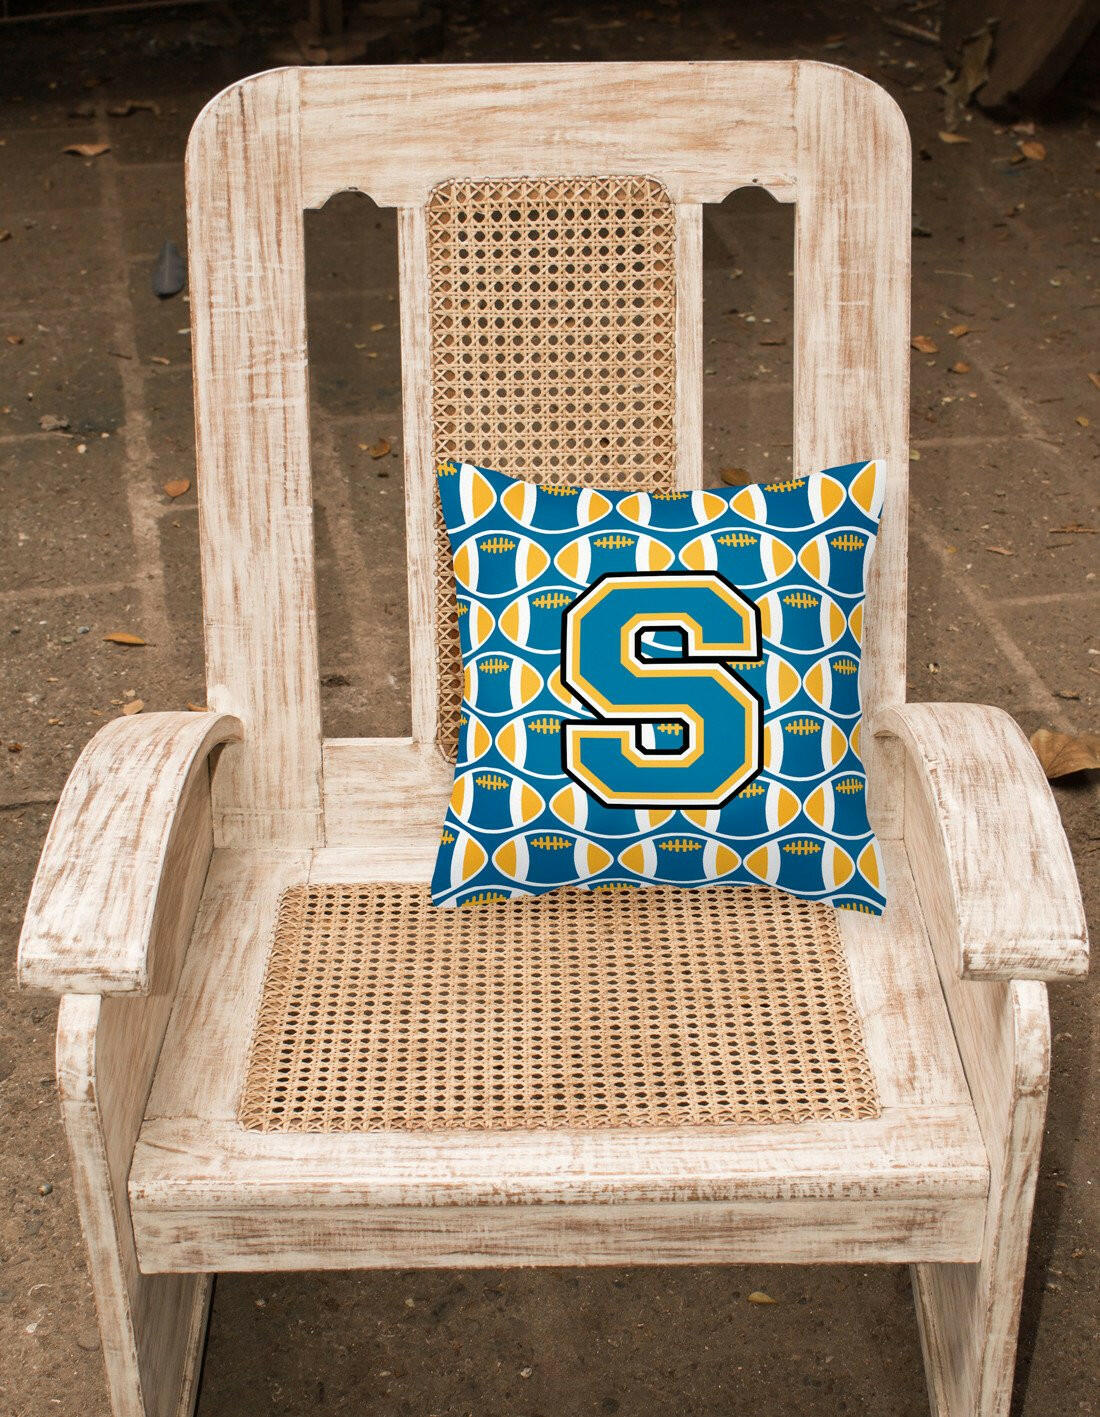 Letter S Football Blue and Gold Fabric Decorative Pillow CJ1077-SPW1414 by Caroline's Treasures